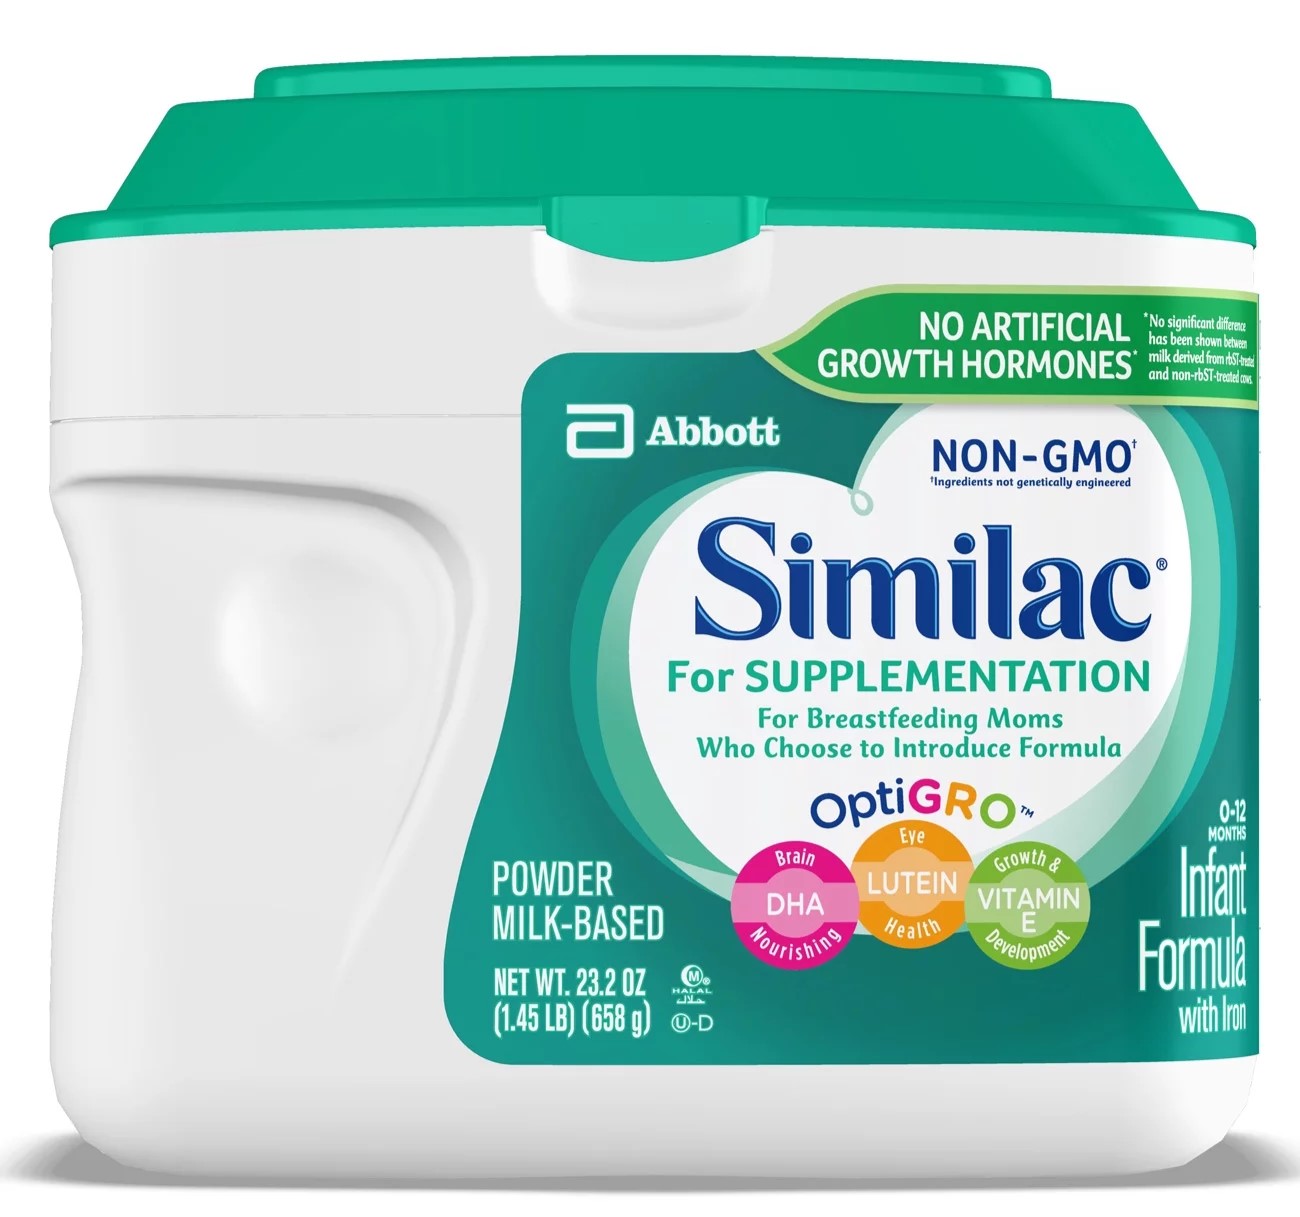 20-similac-for-supplementation-nutrition-facts